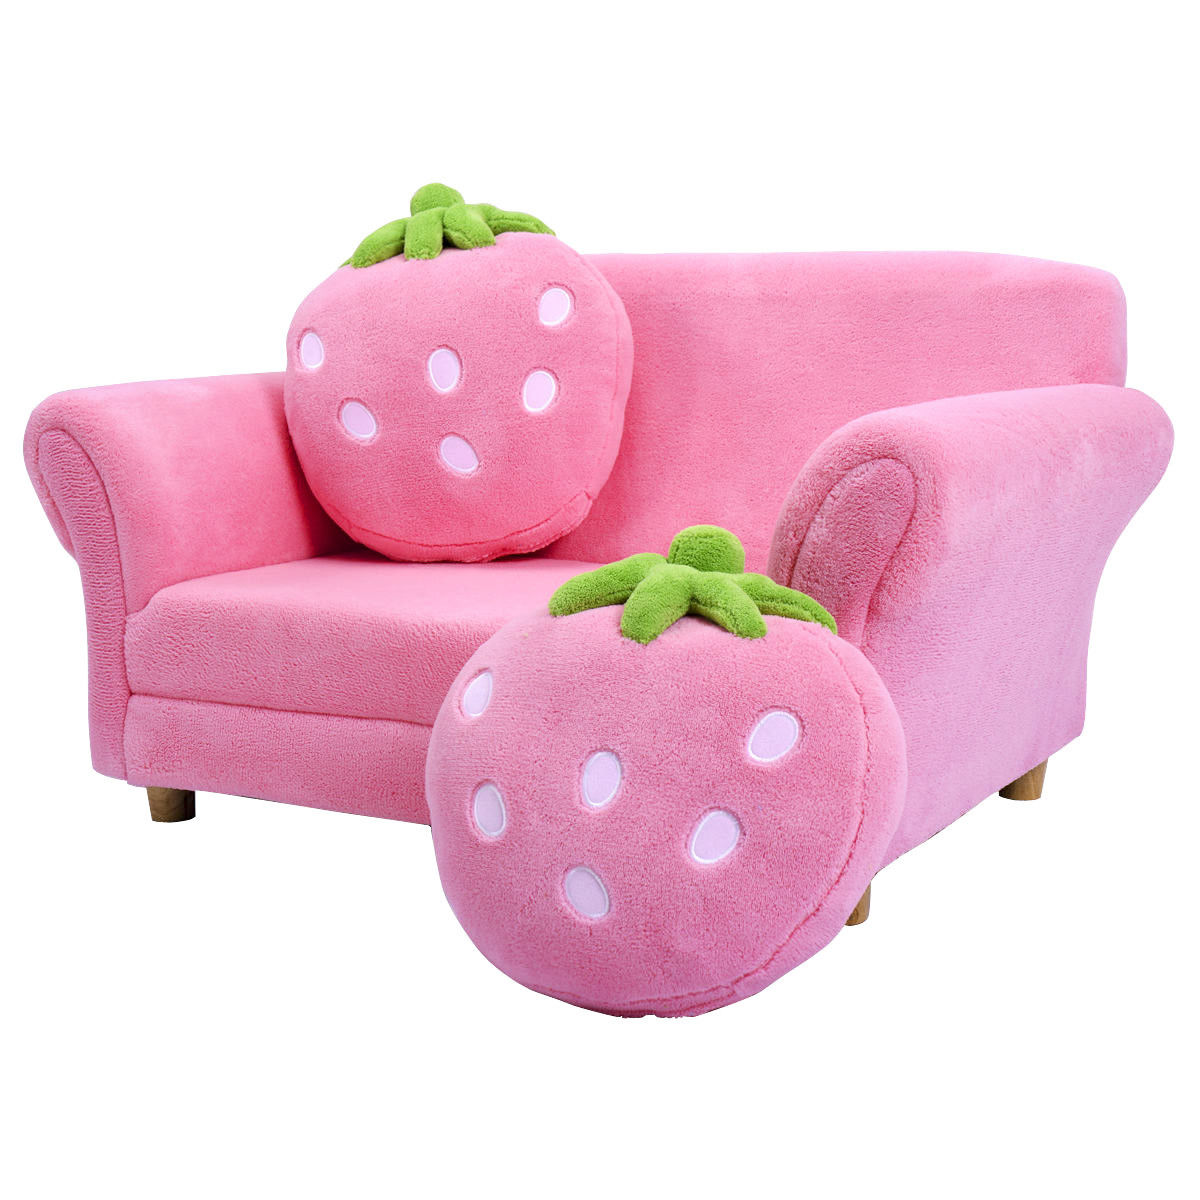 Costway Kids Sofa Strawberry Armrest Chair Lounge Couch w/2 Pillow Children Toddler Pink - image 2 of 10